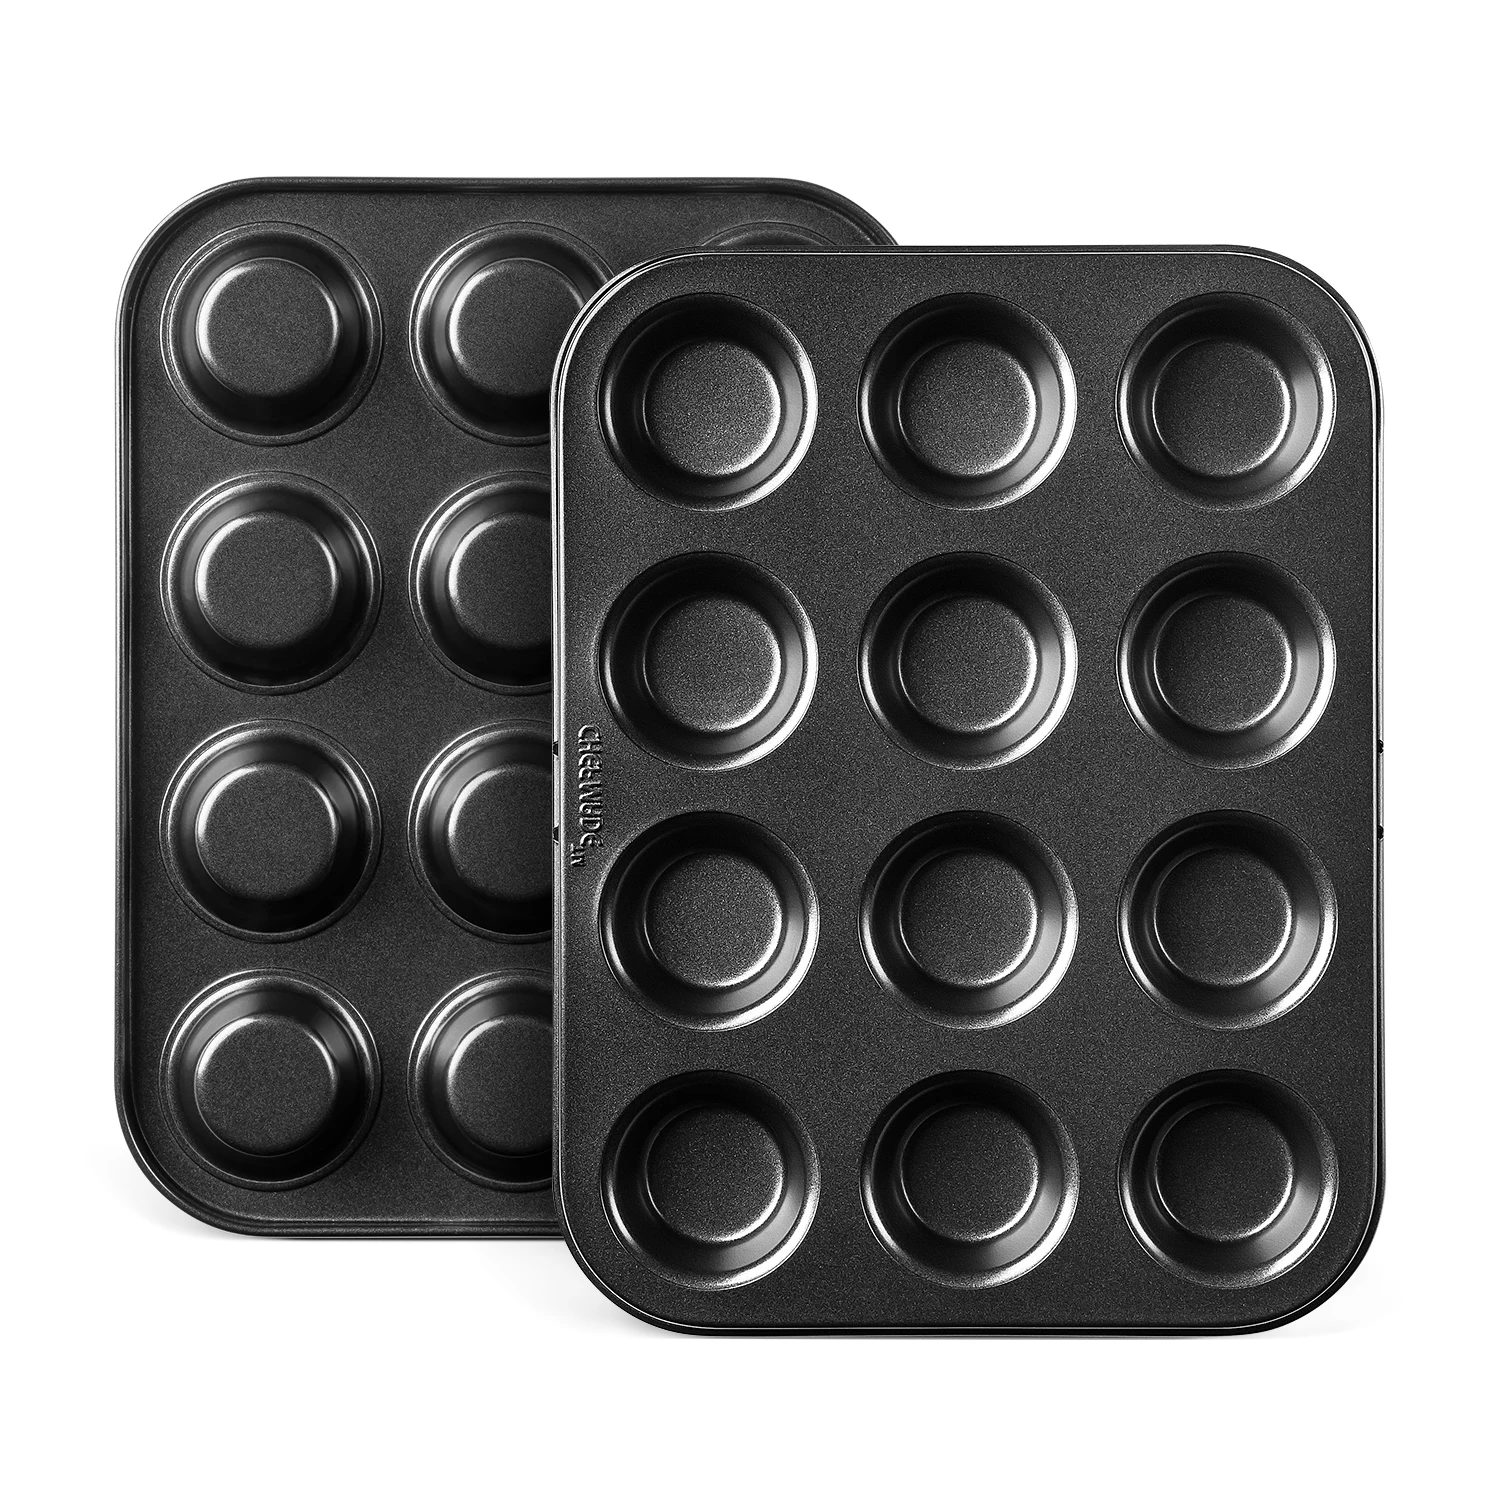 

CHEFMADE Carbon Steel Bakeware 12 Cup Non-stick Round Cupcake Tray Mold Mini Muffin Pan For Oven Baking, Black